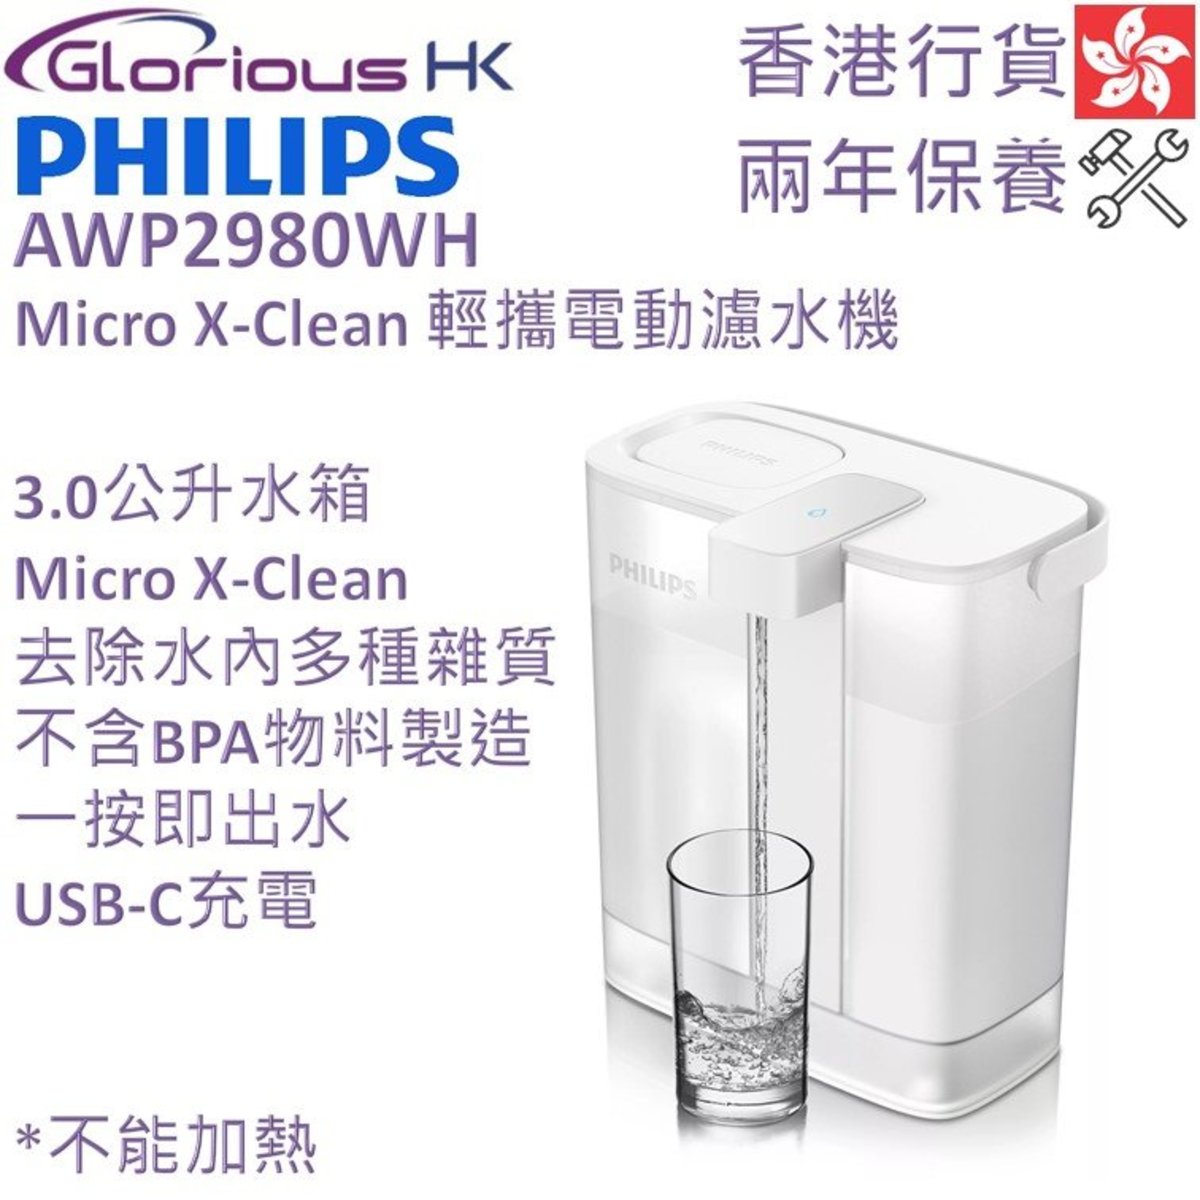 Instant water filter AWP2980WH/97